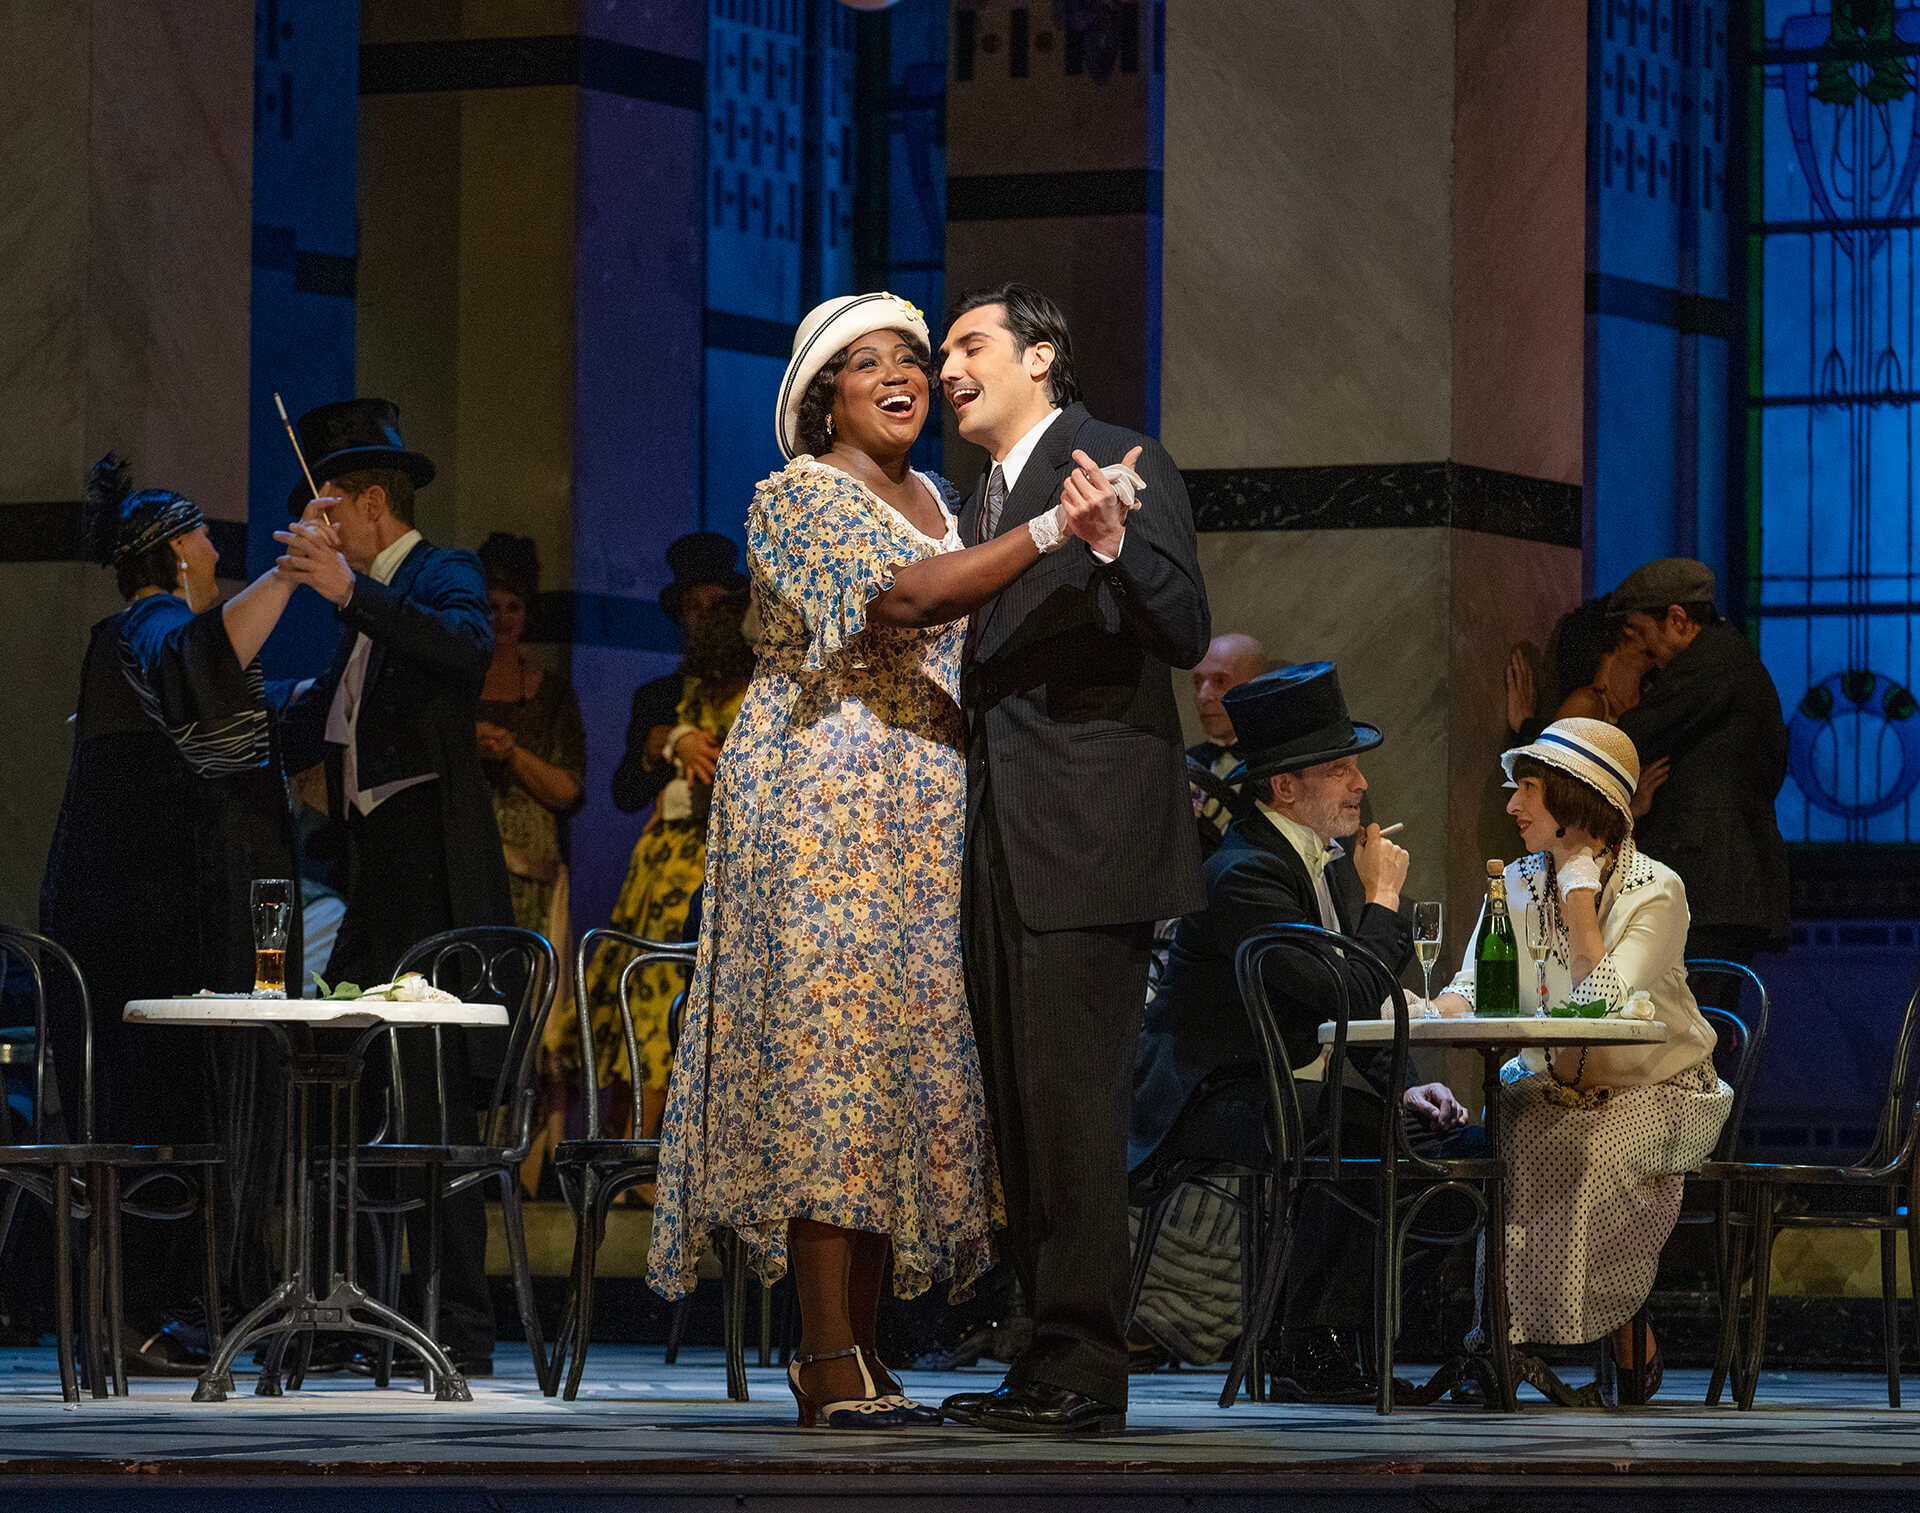 Puccini’s “La Rondine” from the Met Opera in selected Polish theatres on April 20